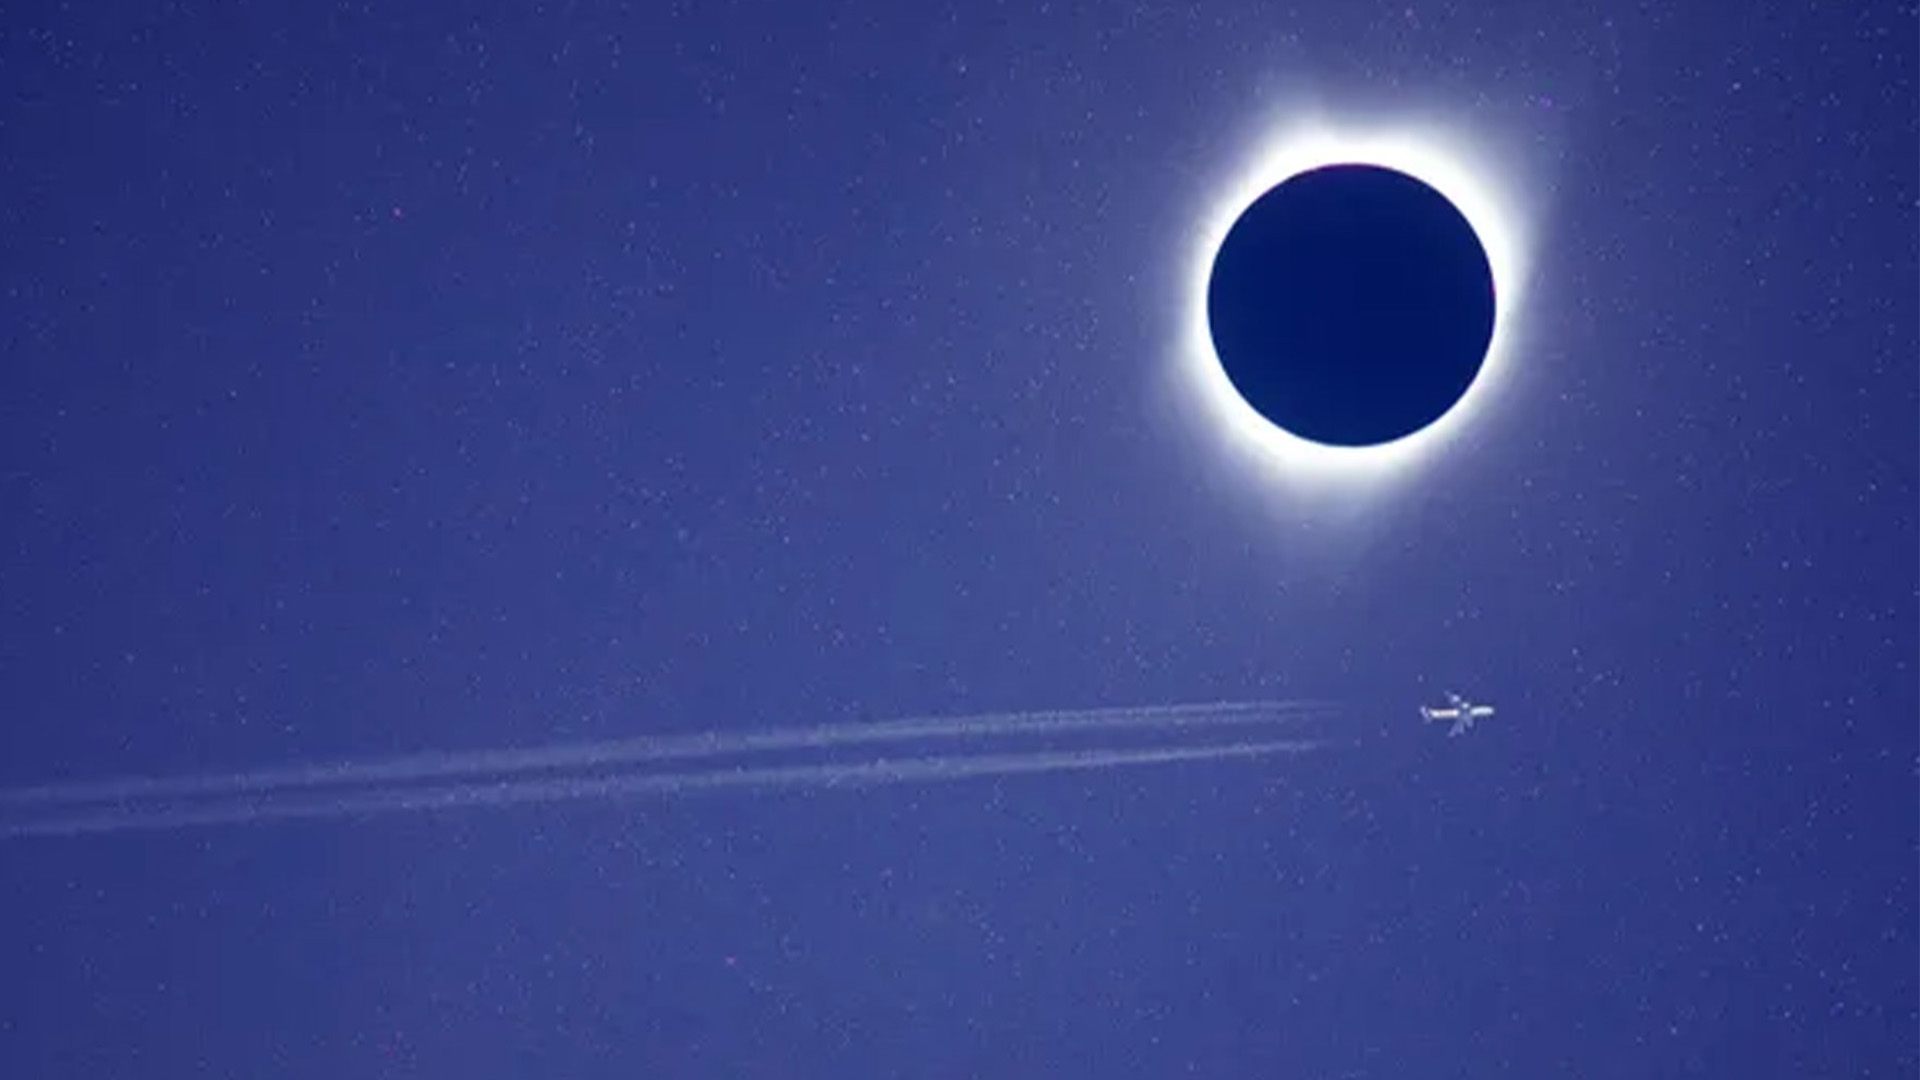 Longest eclipse ever: How scientists rode the supersonic Concorde jet to see a 74-minute totality